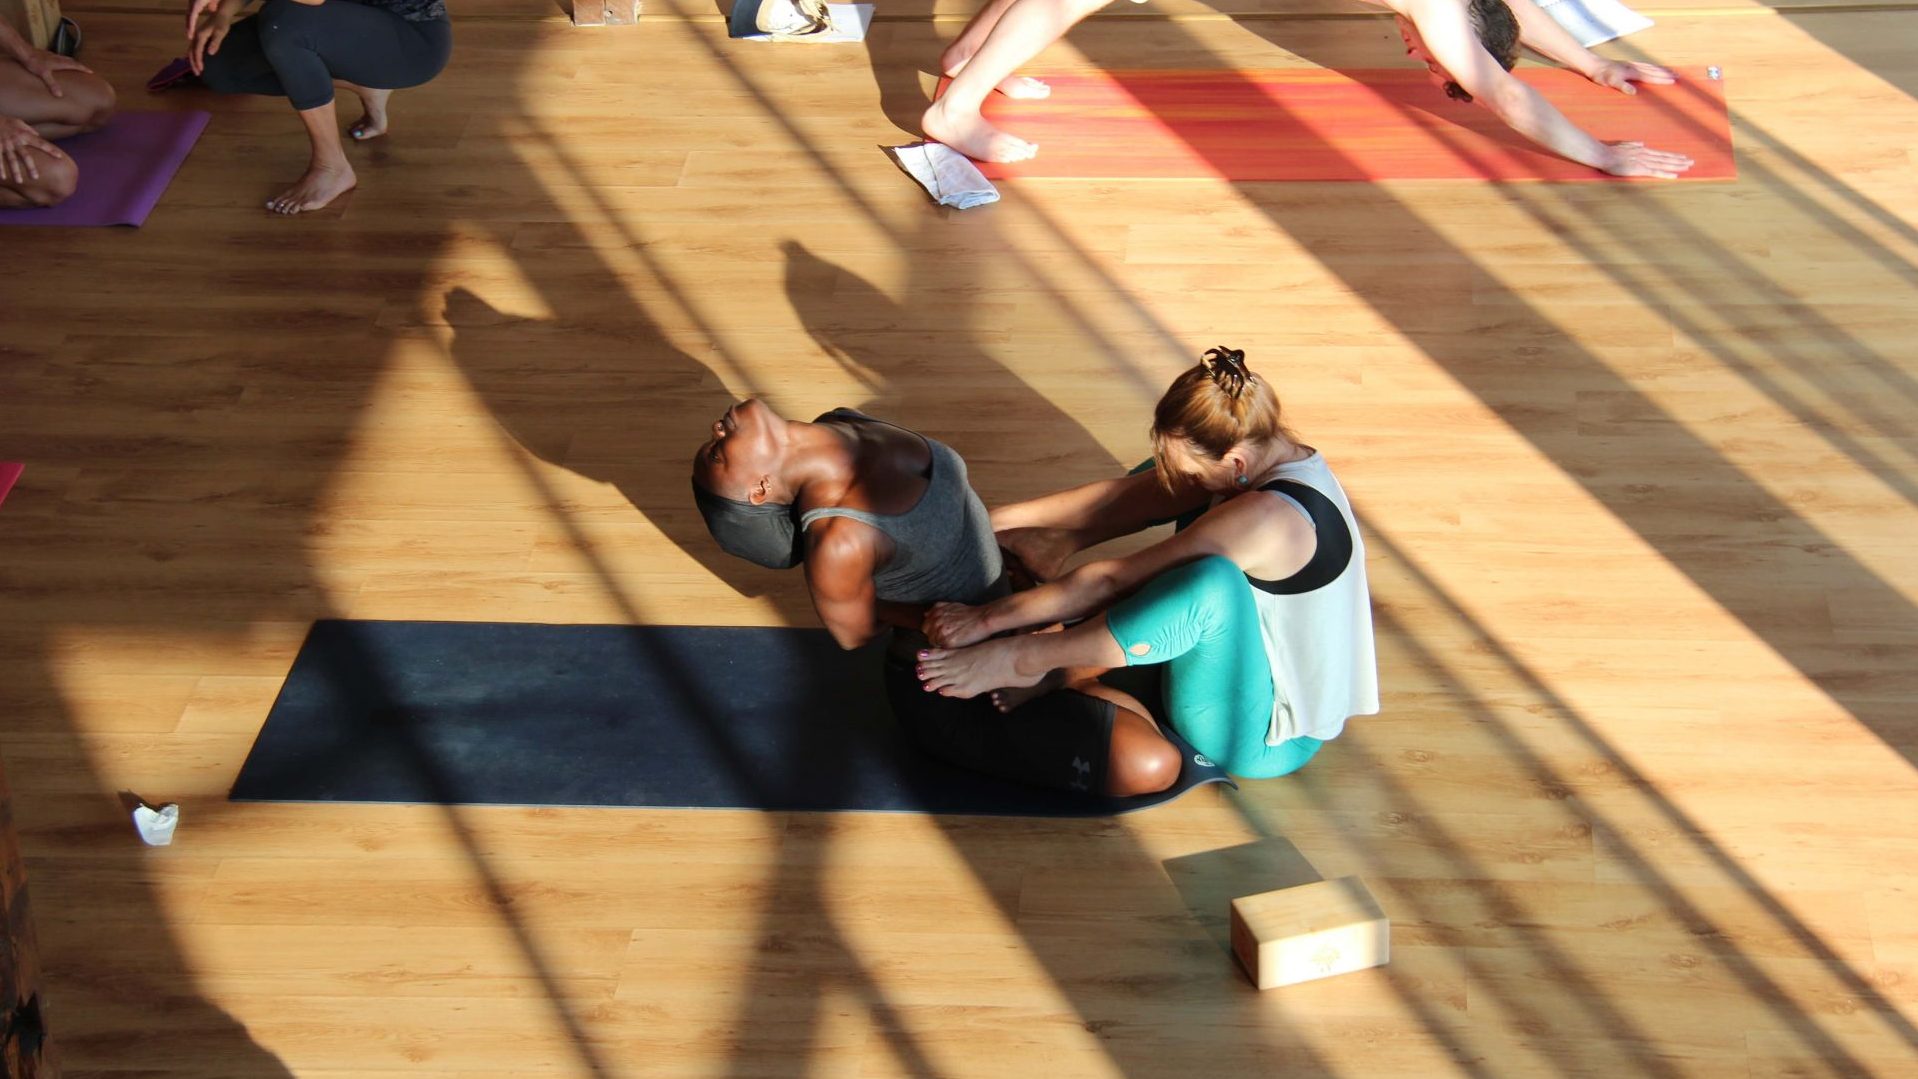 Yoga teacher Valerie giving instructions while a trainee is posing in Bulgaria